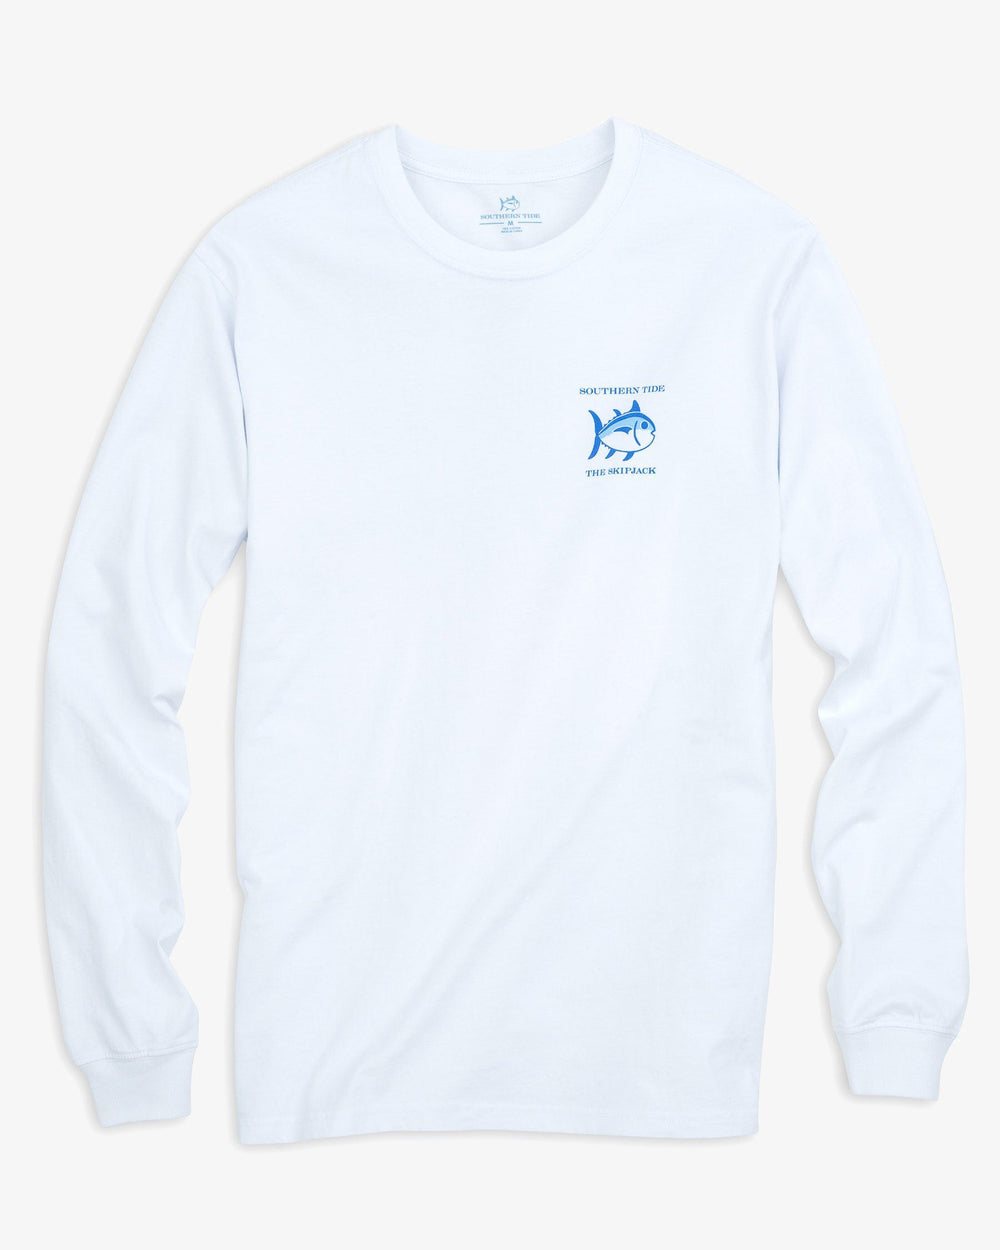 The front view of the Men's White Long Sleeve Original Skipjack T-shirt by Southern Tide - Classic White